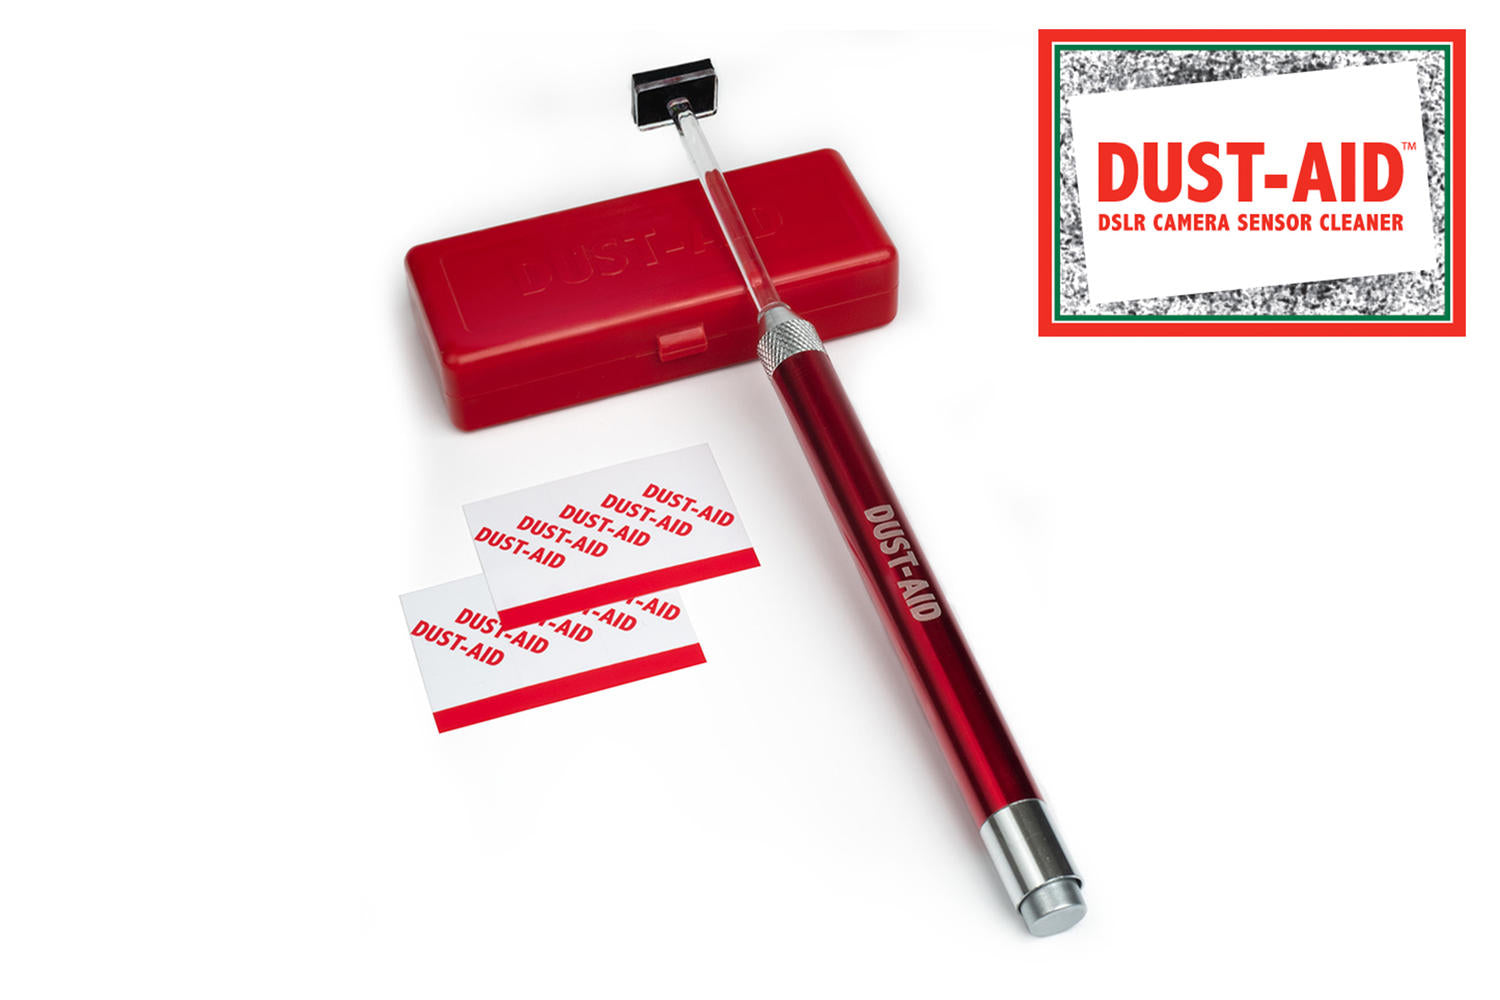 Dust-Aid Platinum Light Wand Cleaning Kit